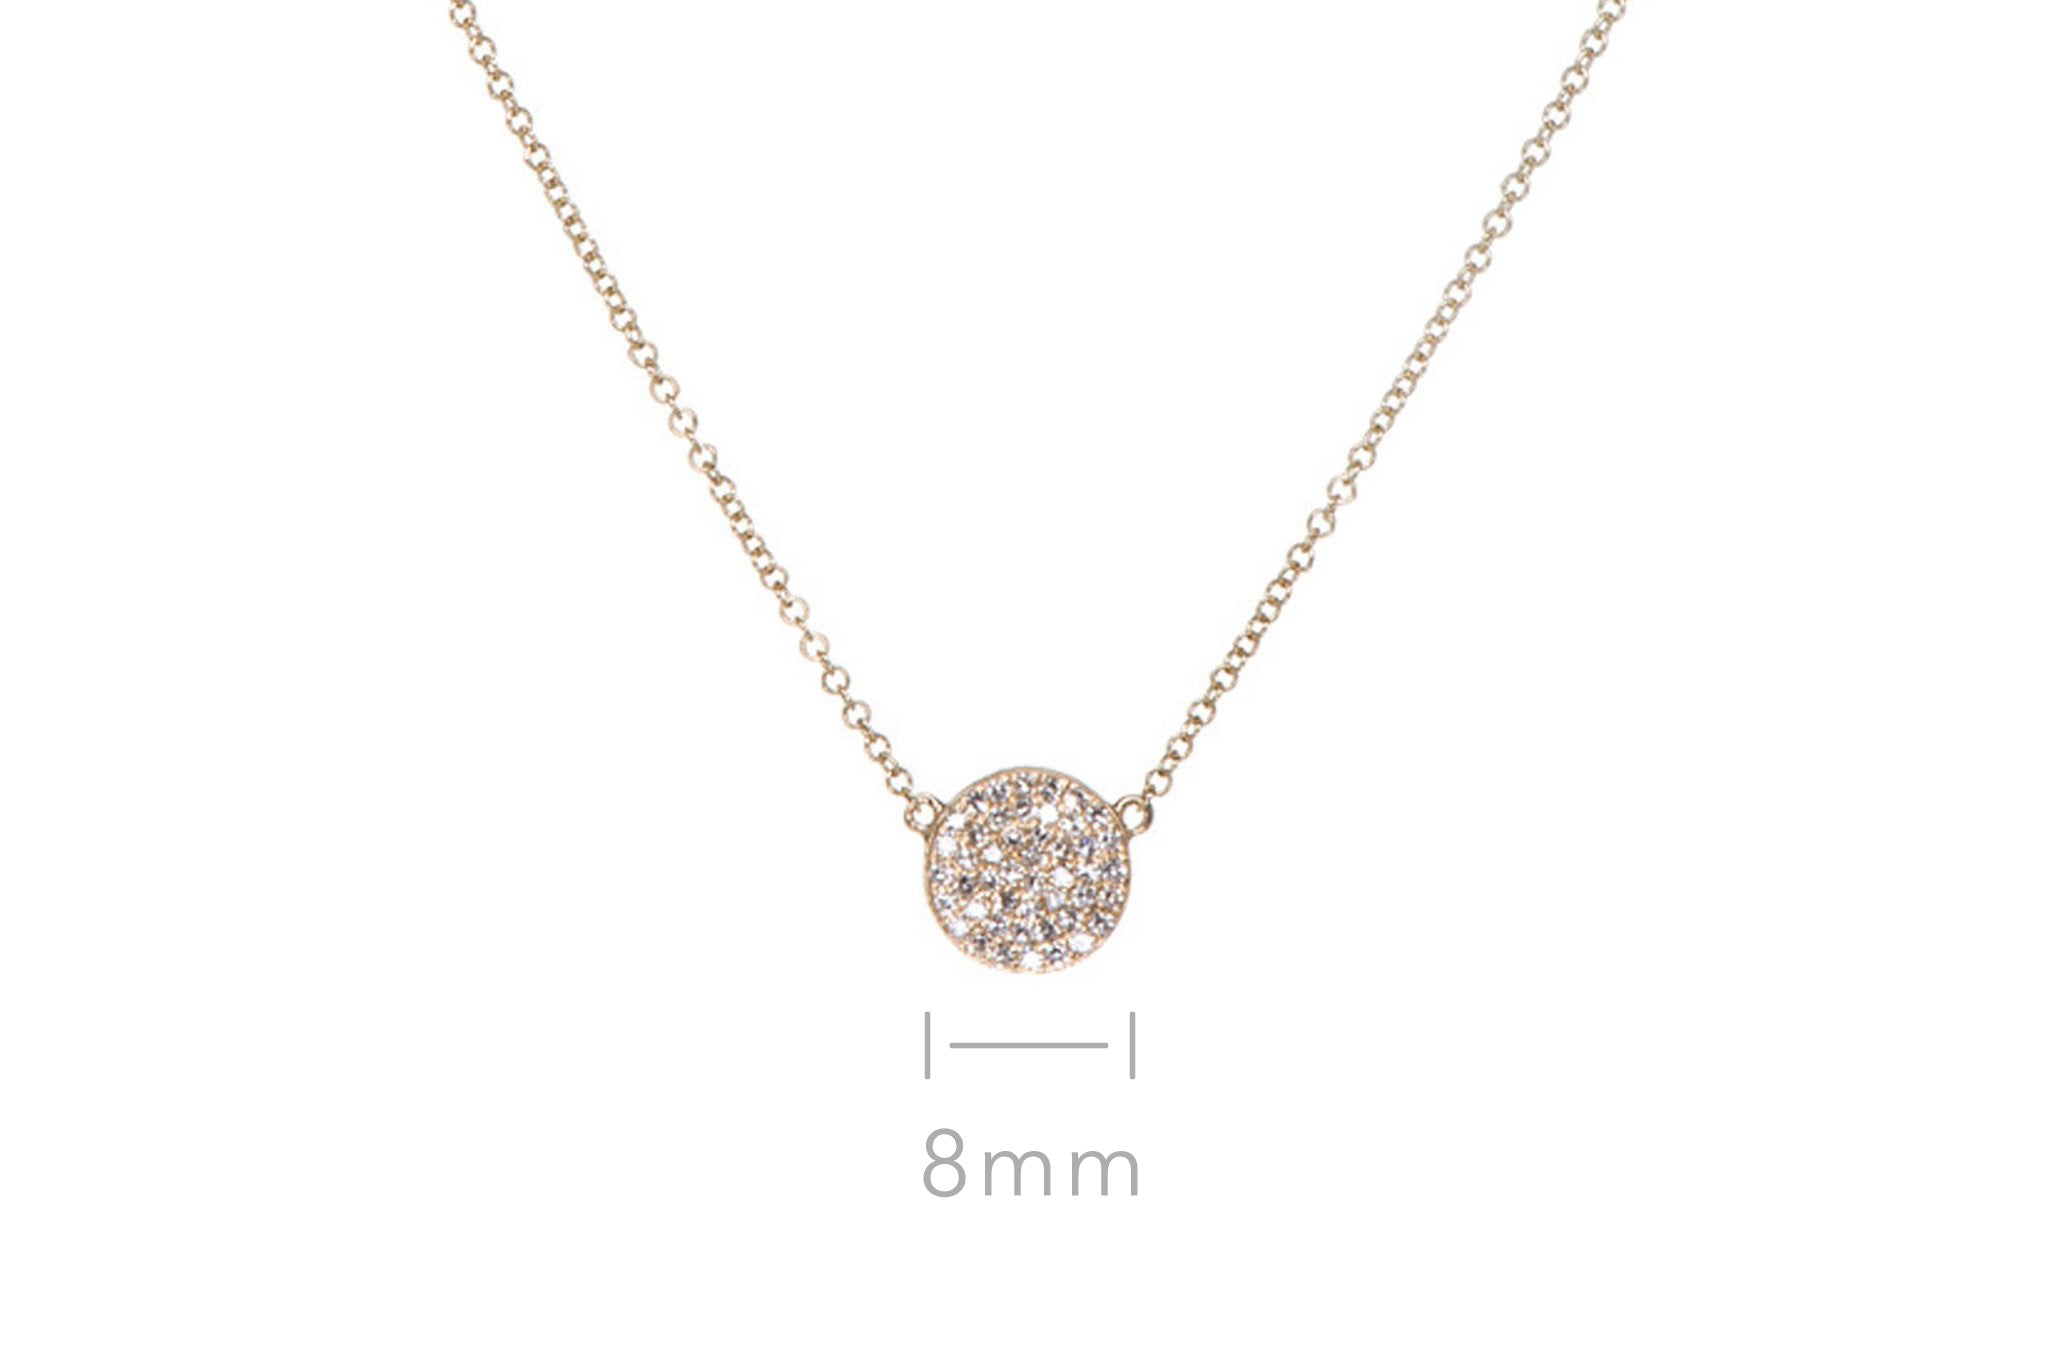 Diamond Disc Necklace in 14k yellow gold with size diagram of pendant being 8mm